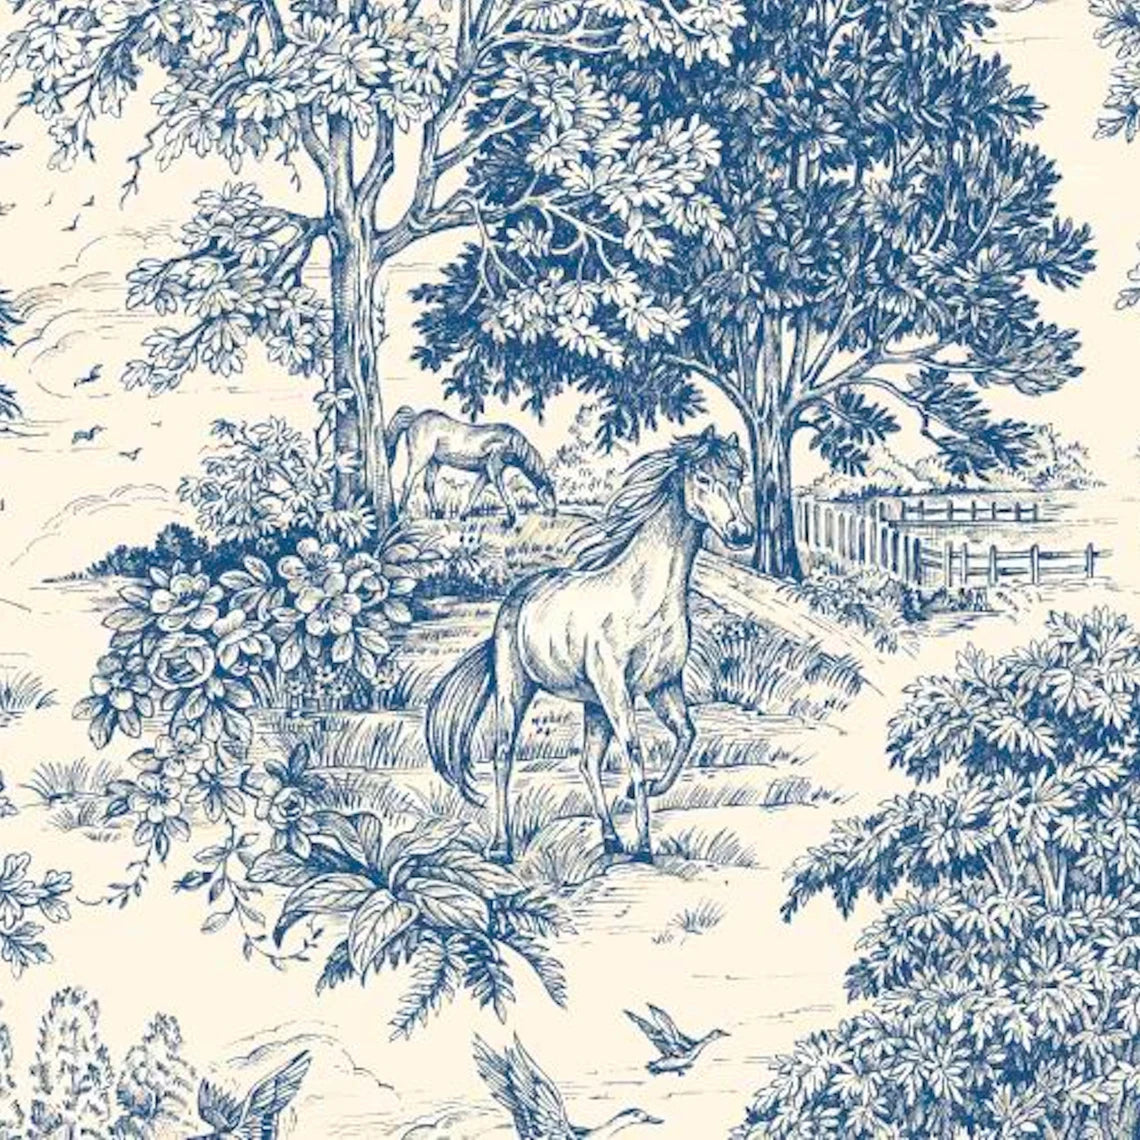 rod pocket curtain panels pair in Yellowstone Bluebell Blue Country Toile- Horses, Deer, Dogs- Large Scale